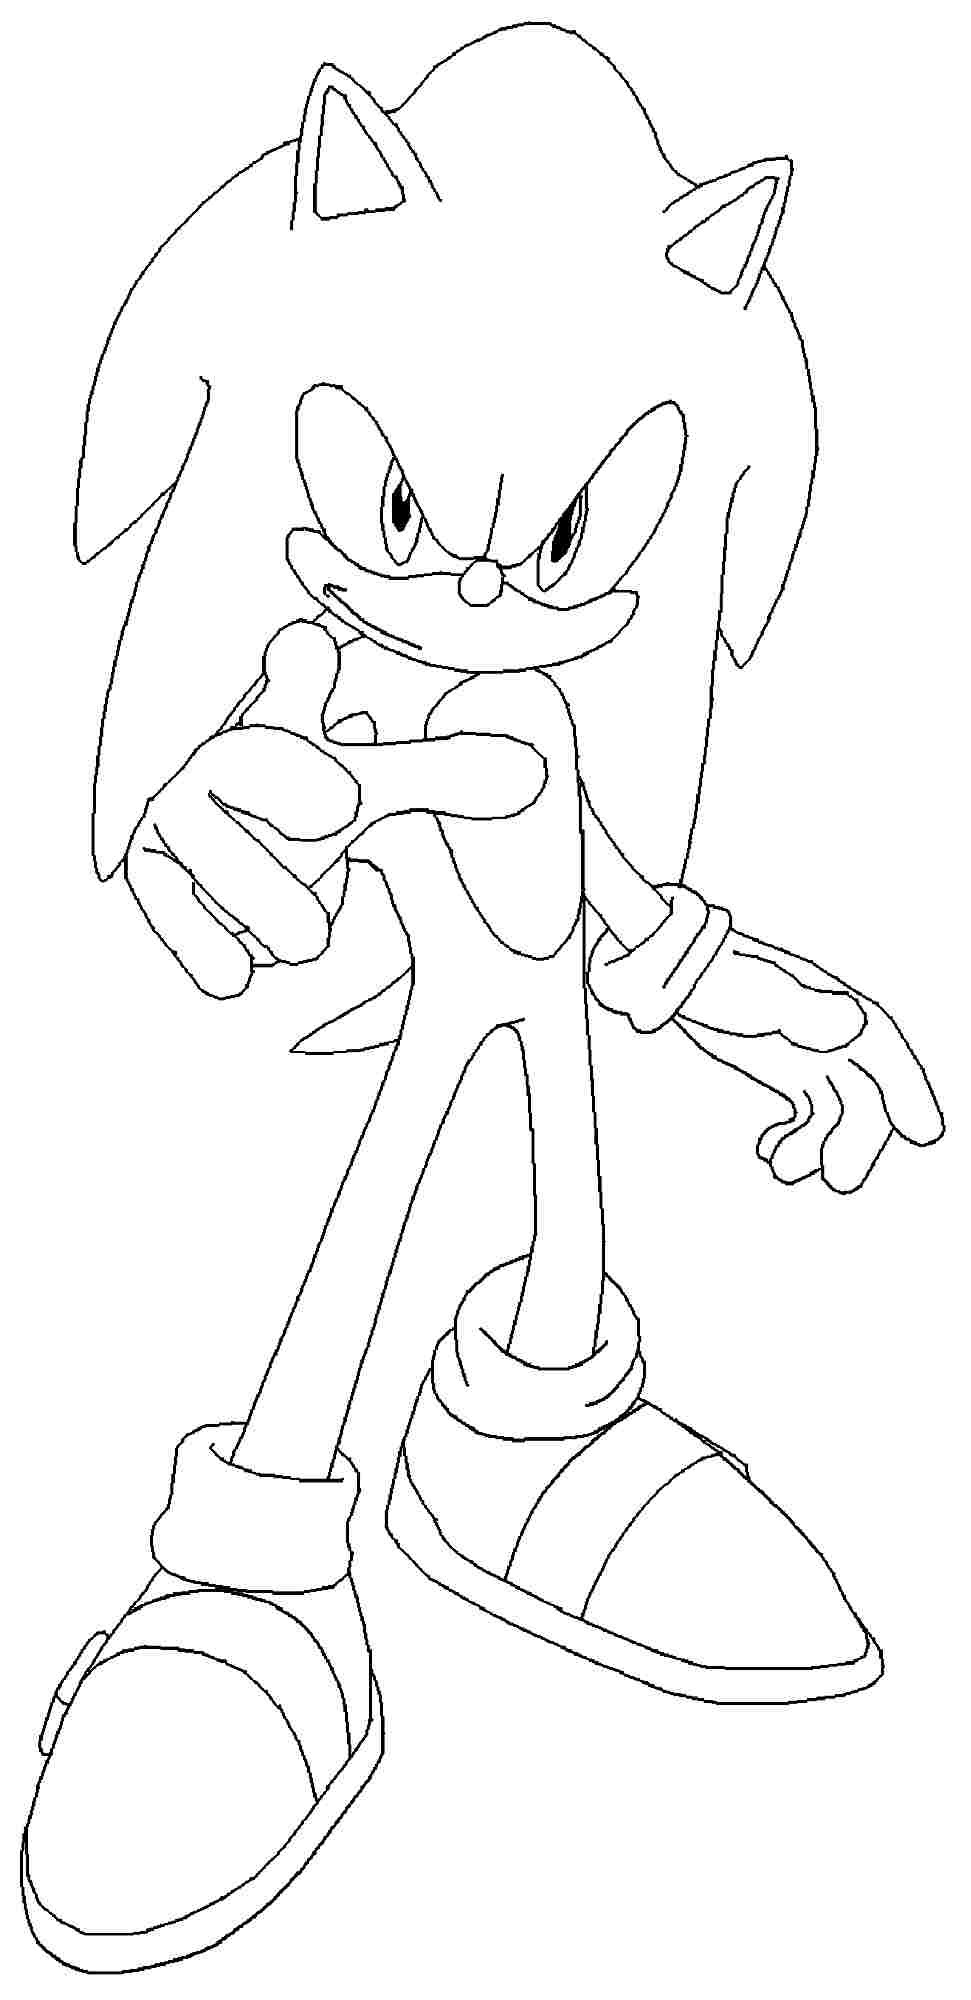 Free Sonic The Hedgehog Running Coloring Pages, Download Free Sonic The